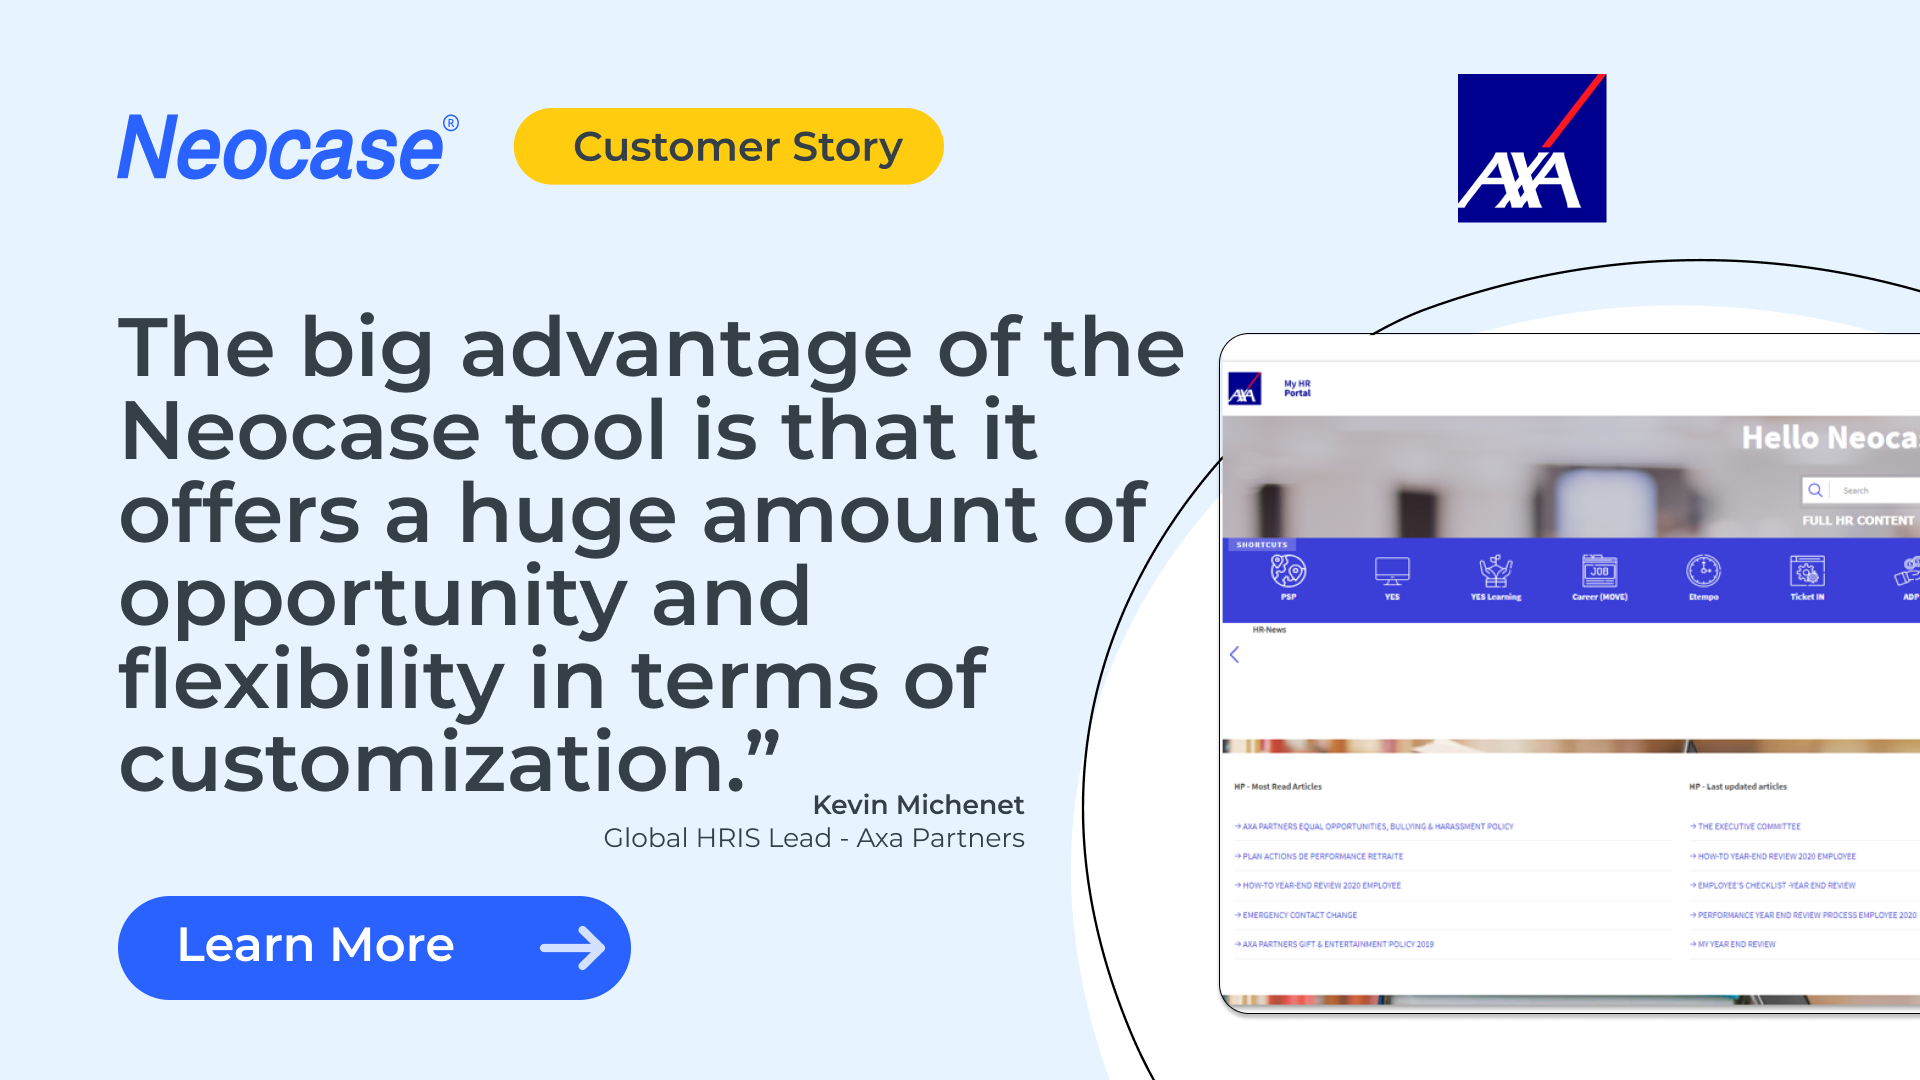 Axa Partners digitized employee documentation onboarding preboarding and employee requests with Neocase